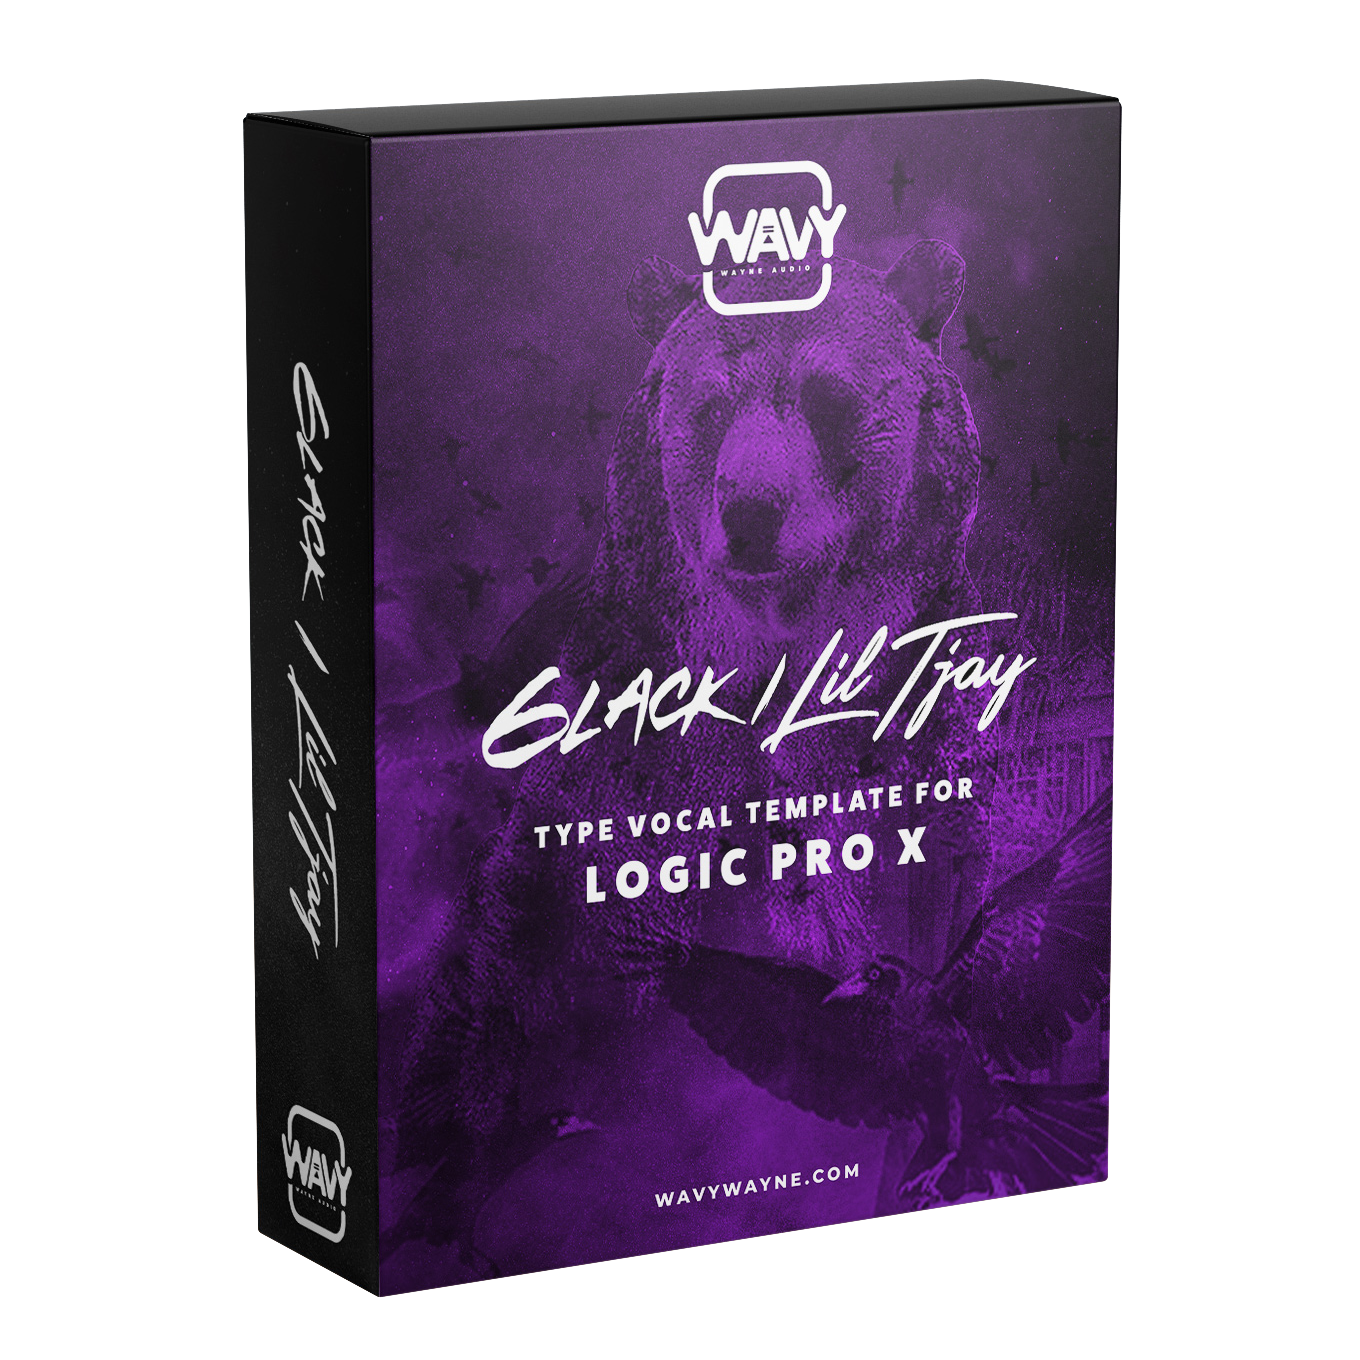 Lil TJay/6Lack Type Template for Logic Pro X